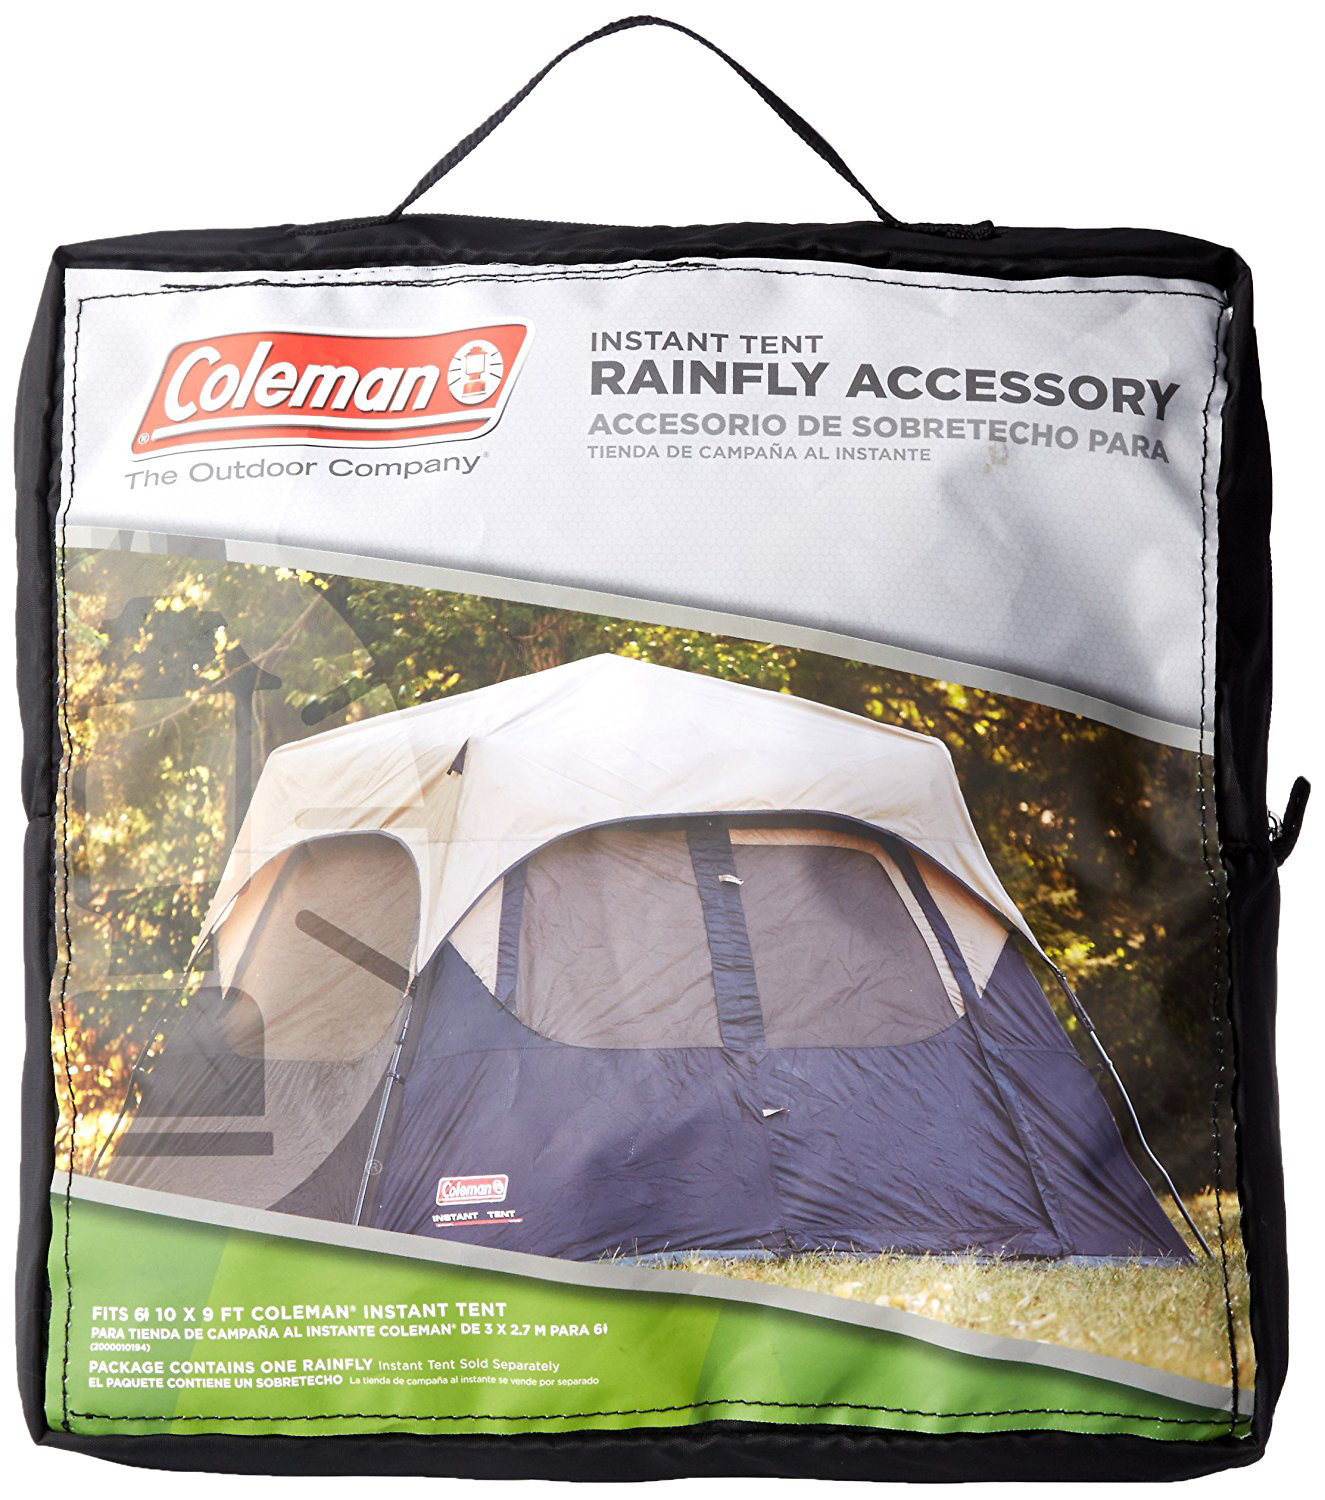 Coleman Rainfly Accessory for 6-Person Instant Tent, 10' x 9', 'Multicolor' - image 3 of 7